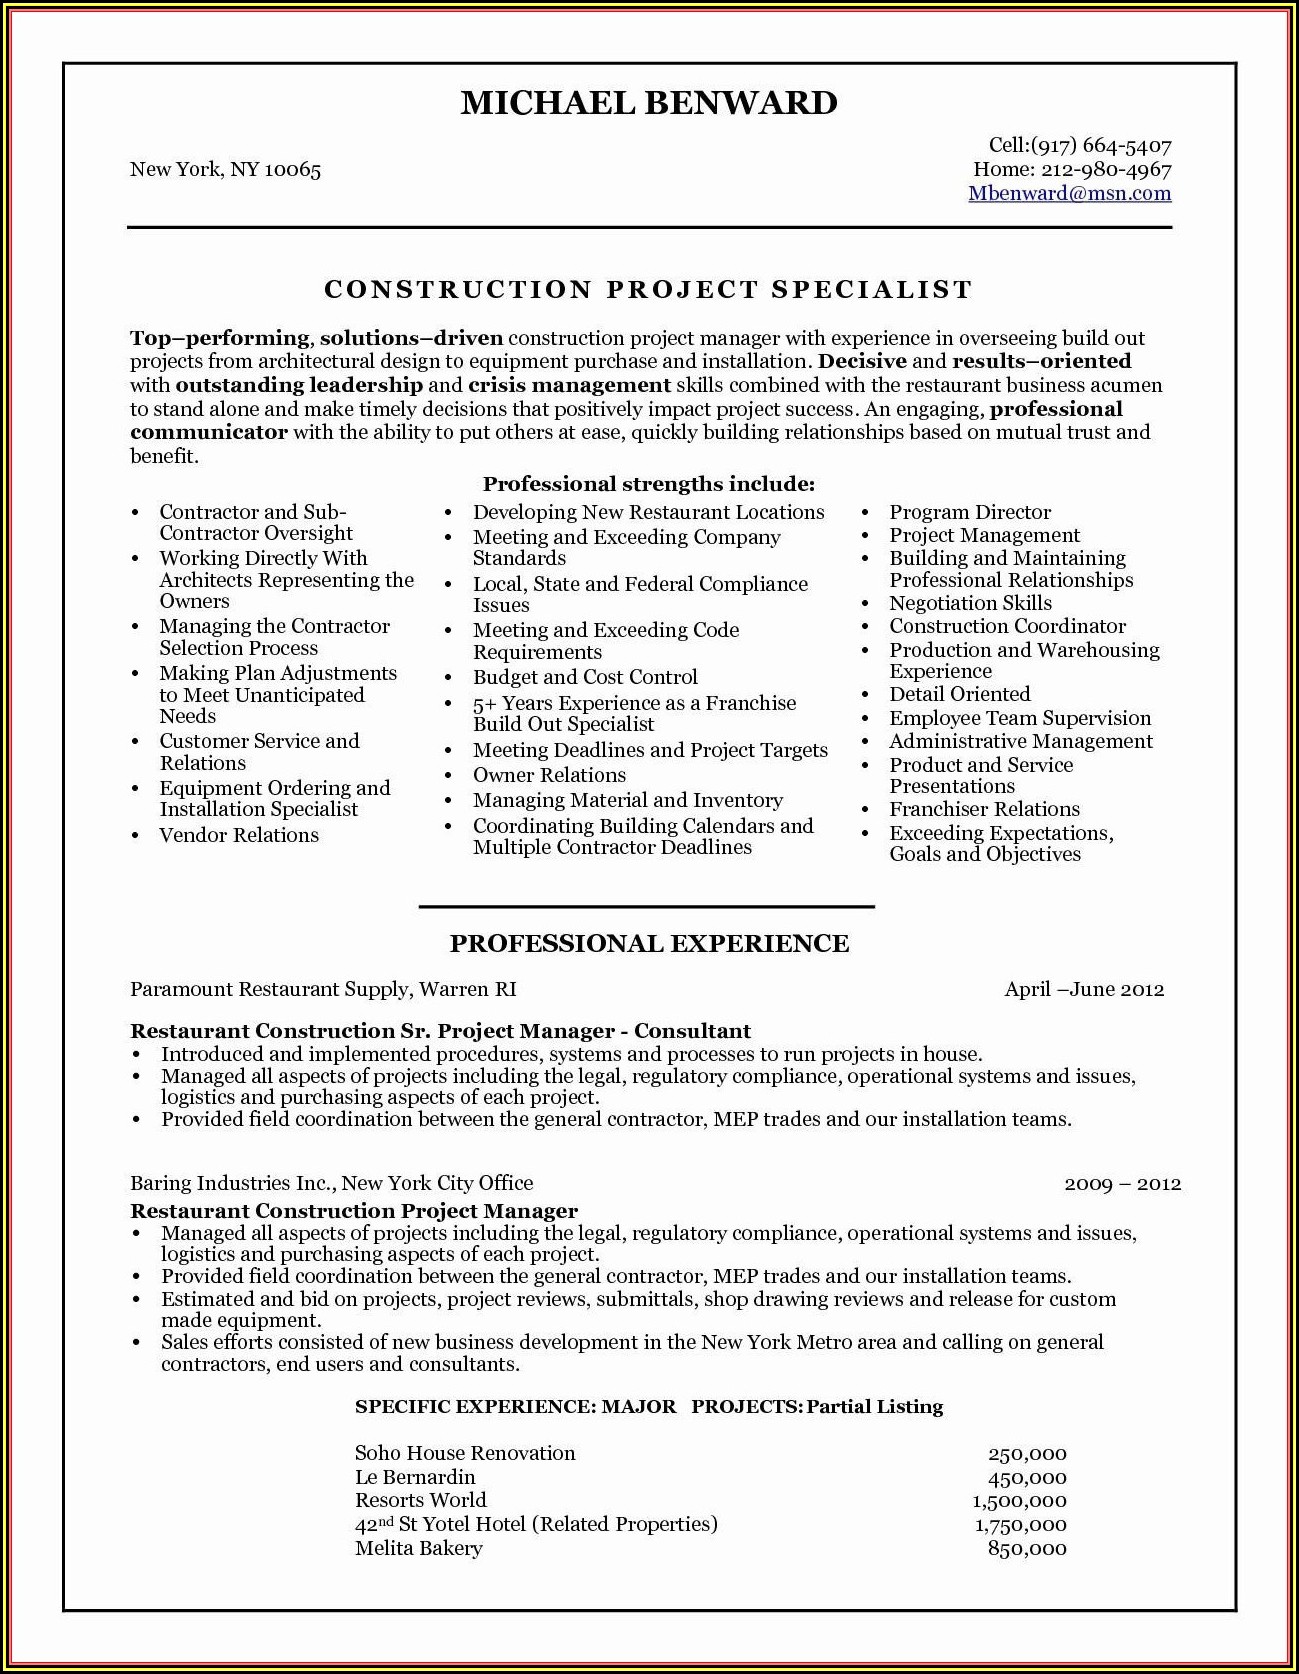 Resume Objective For Project Managers